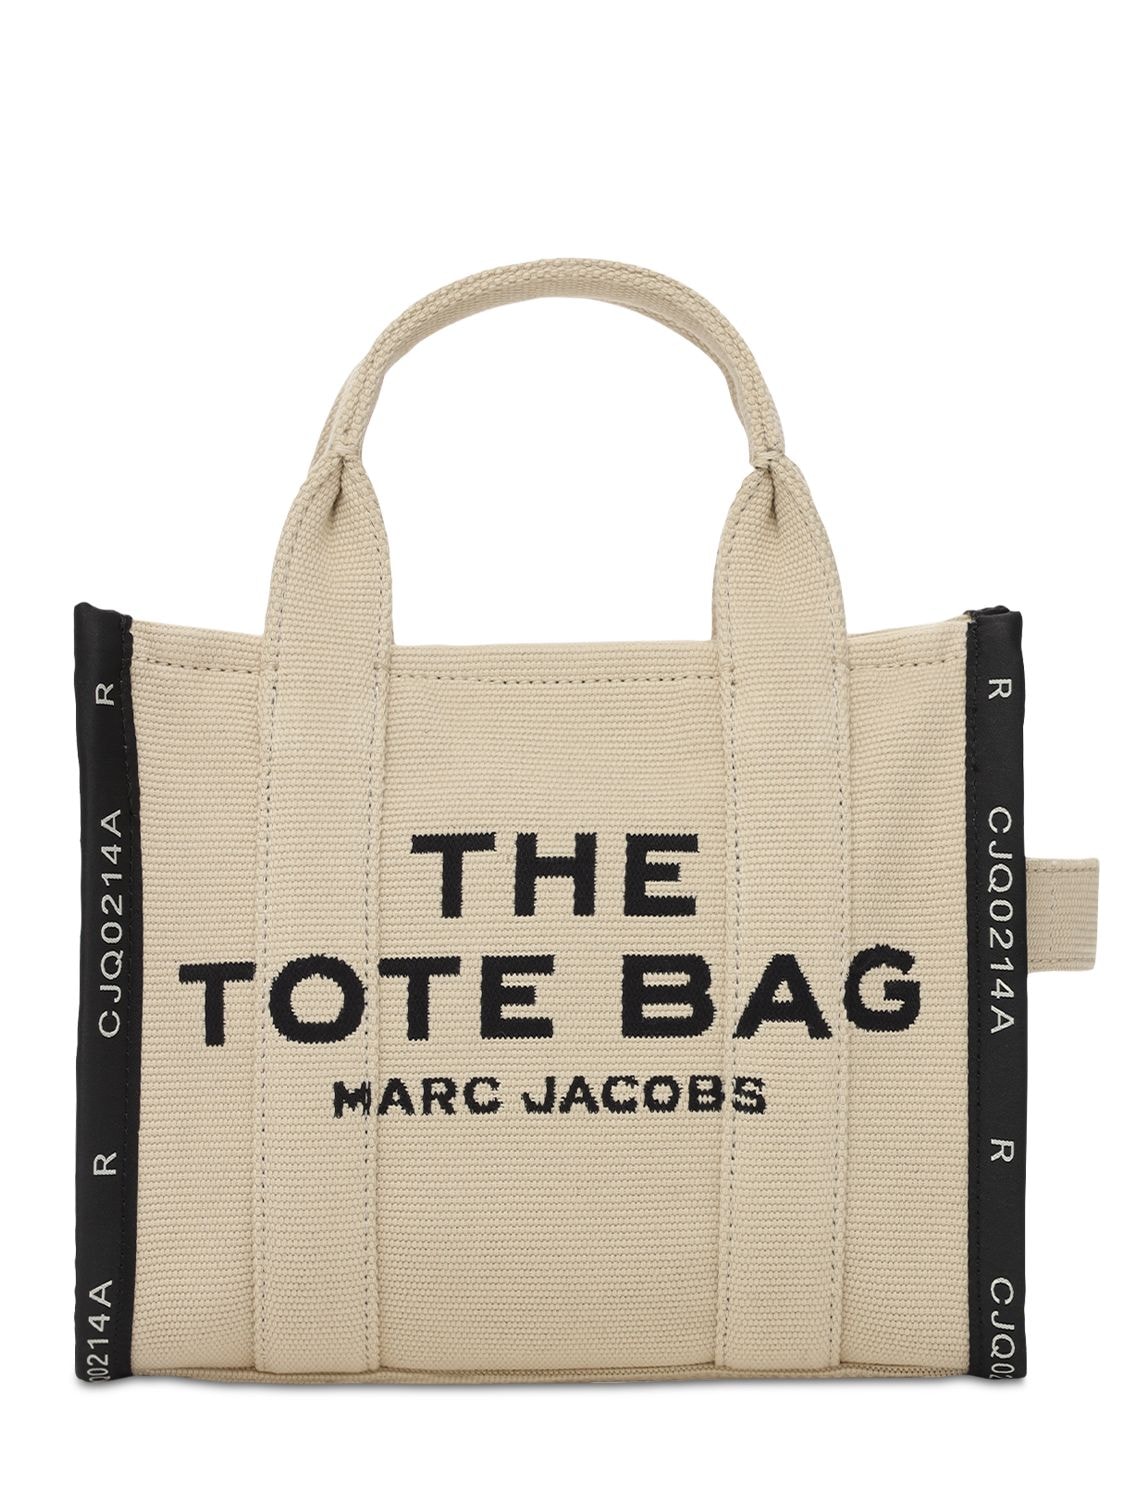 Red date Officials Make way Marc Jacobs (the) - Mini cotton canvas tote bag - Warm Sand | Luisaviaroma